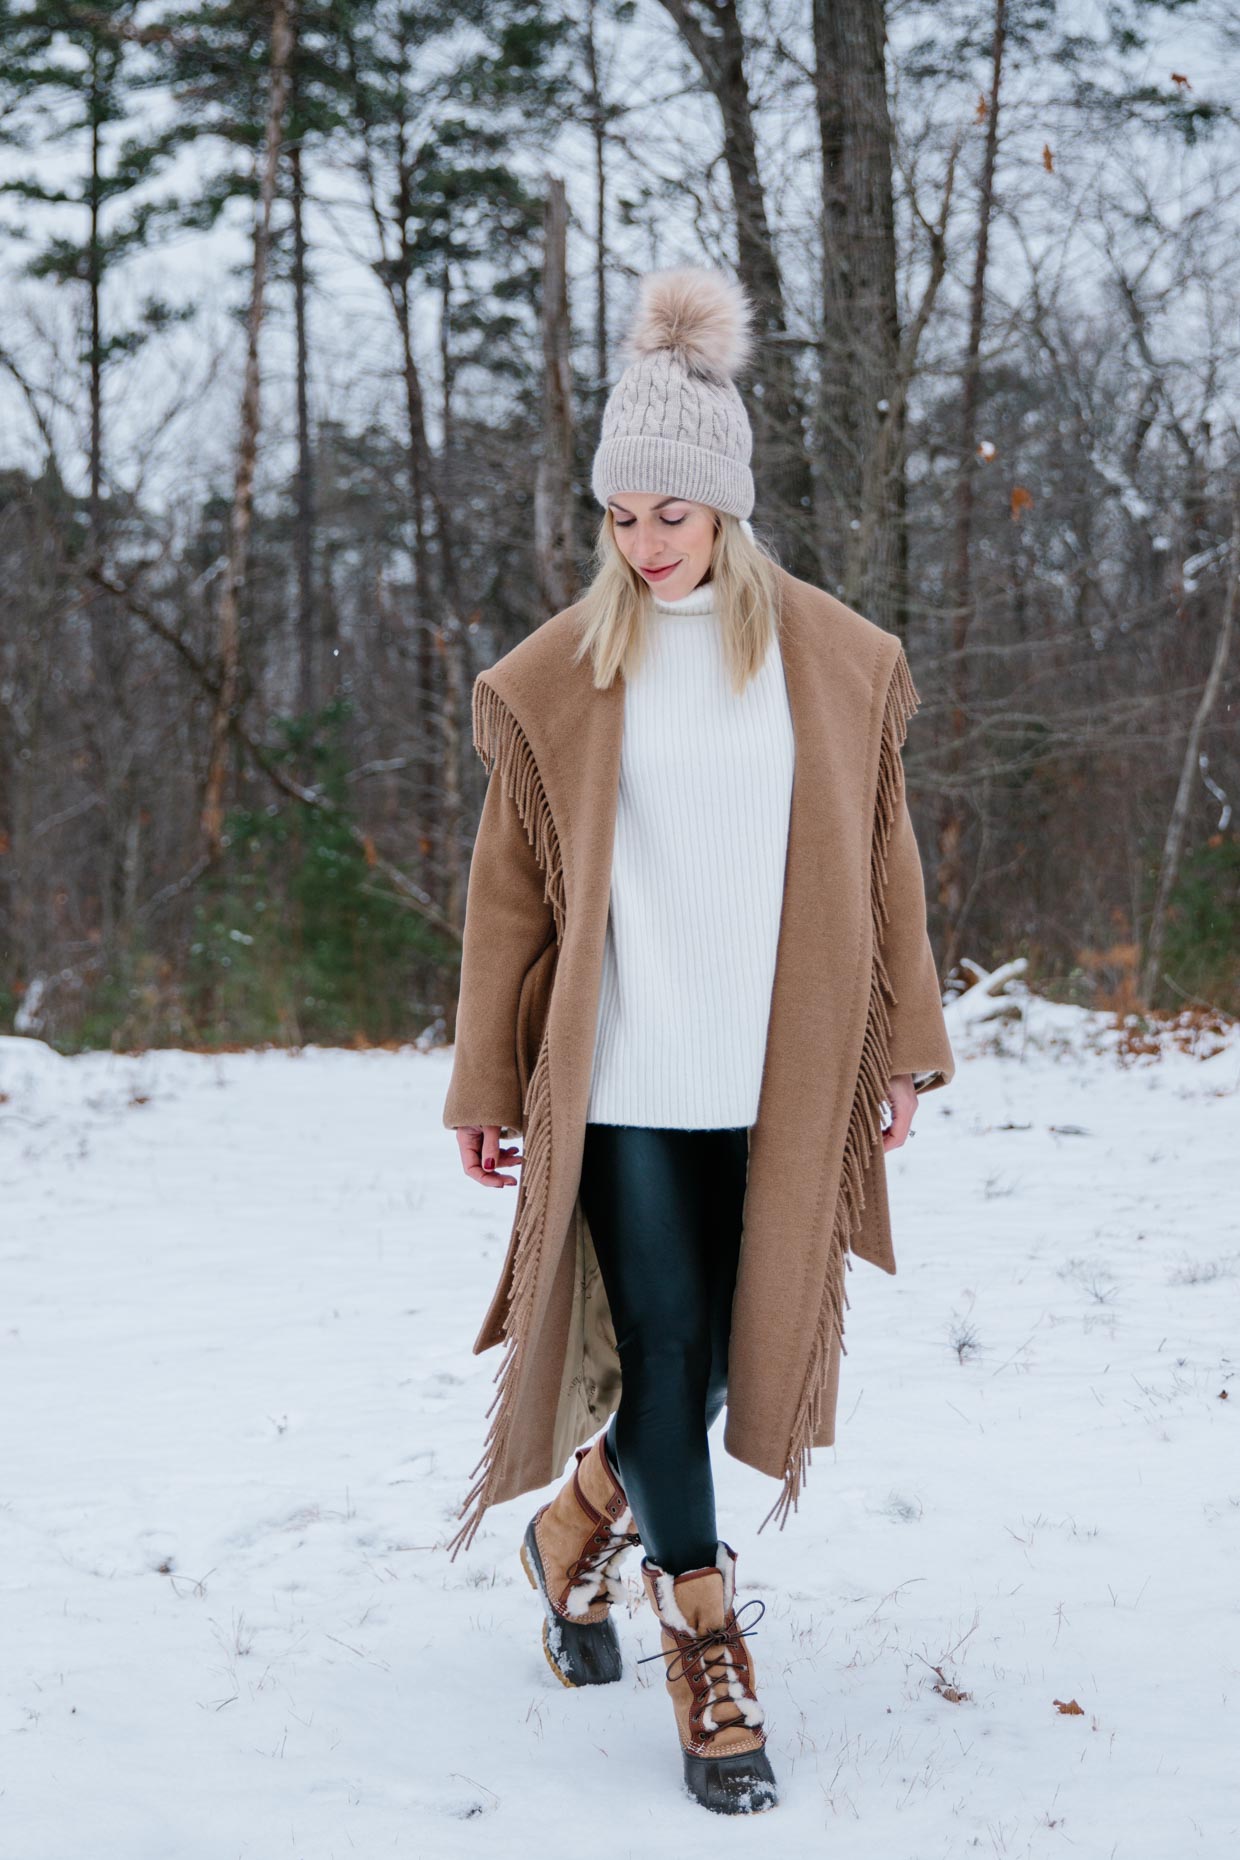 Snow Day in the Woods: Fringe Coat with Faux Leather Leggings & Sherpa Boots  - Meagan's Moda